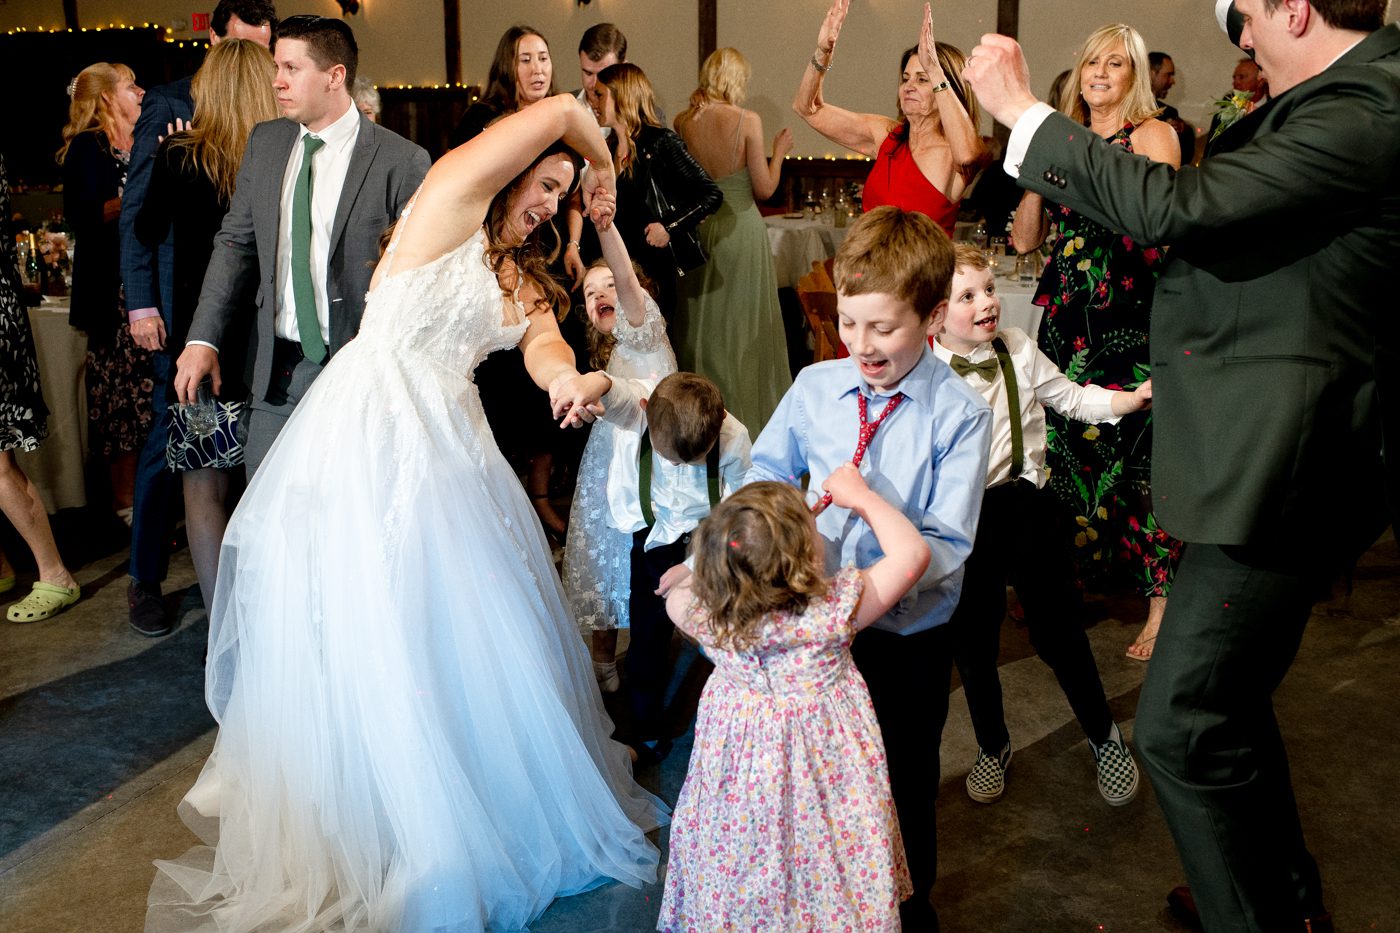 bride-twirl-dancing-with-kids-at-wedding-reception-The-Woodlands-at-Cottonwood-Canyon